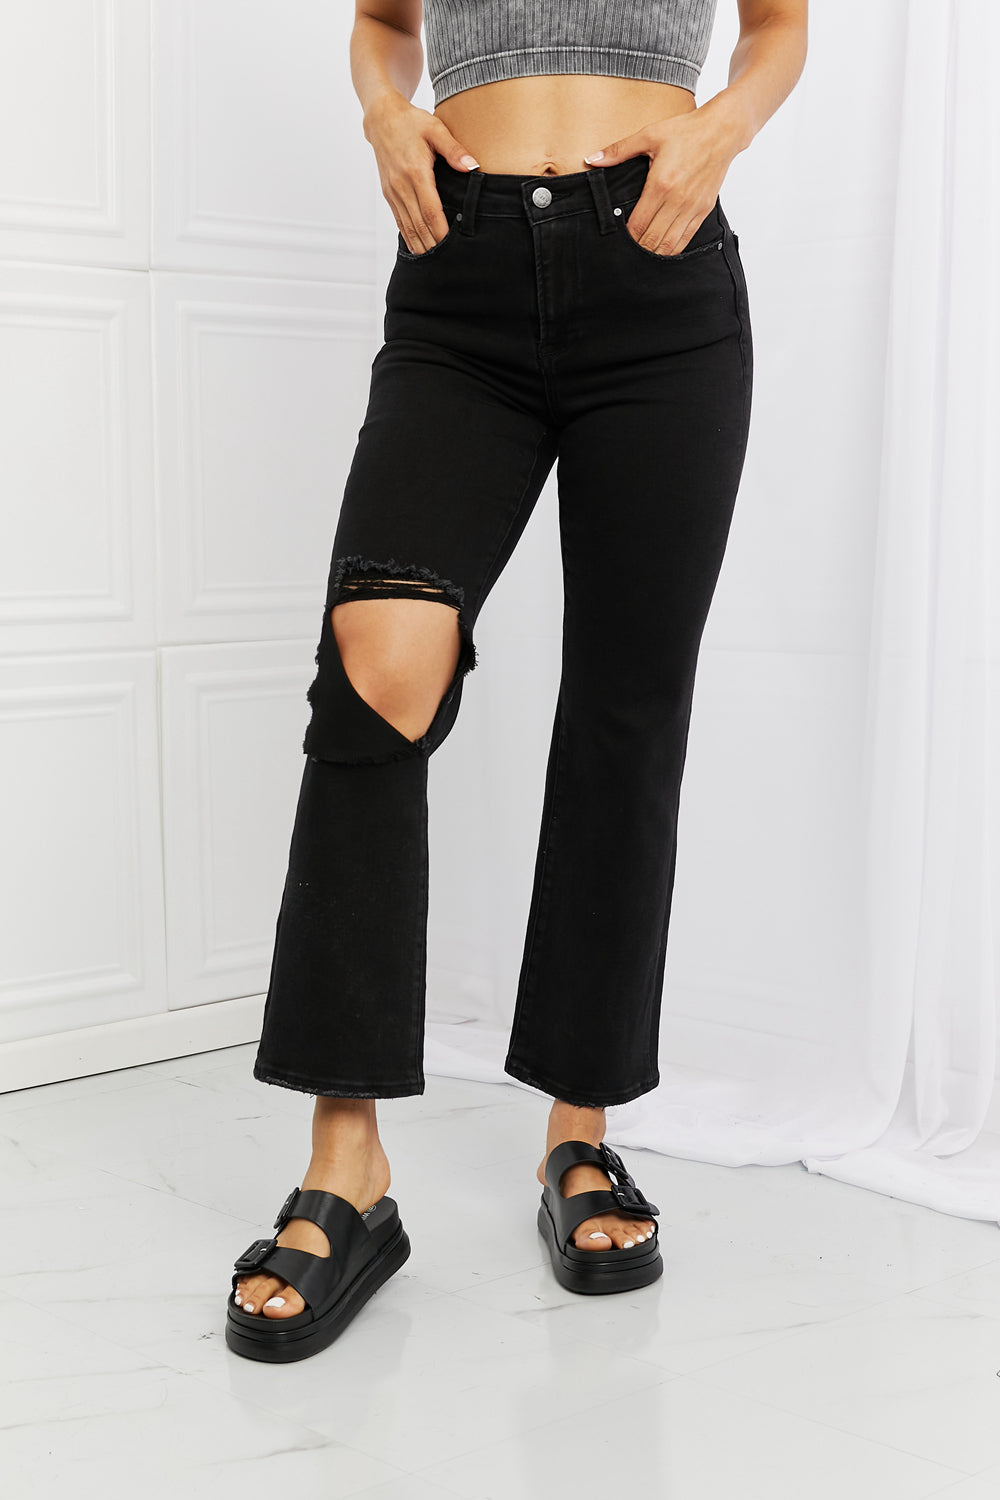 RISEN Black Denim Relaxed Fit Distressed Jeans